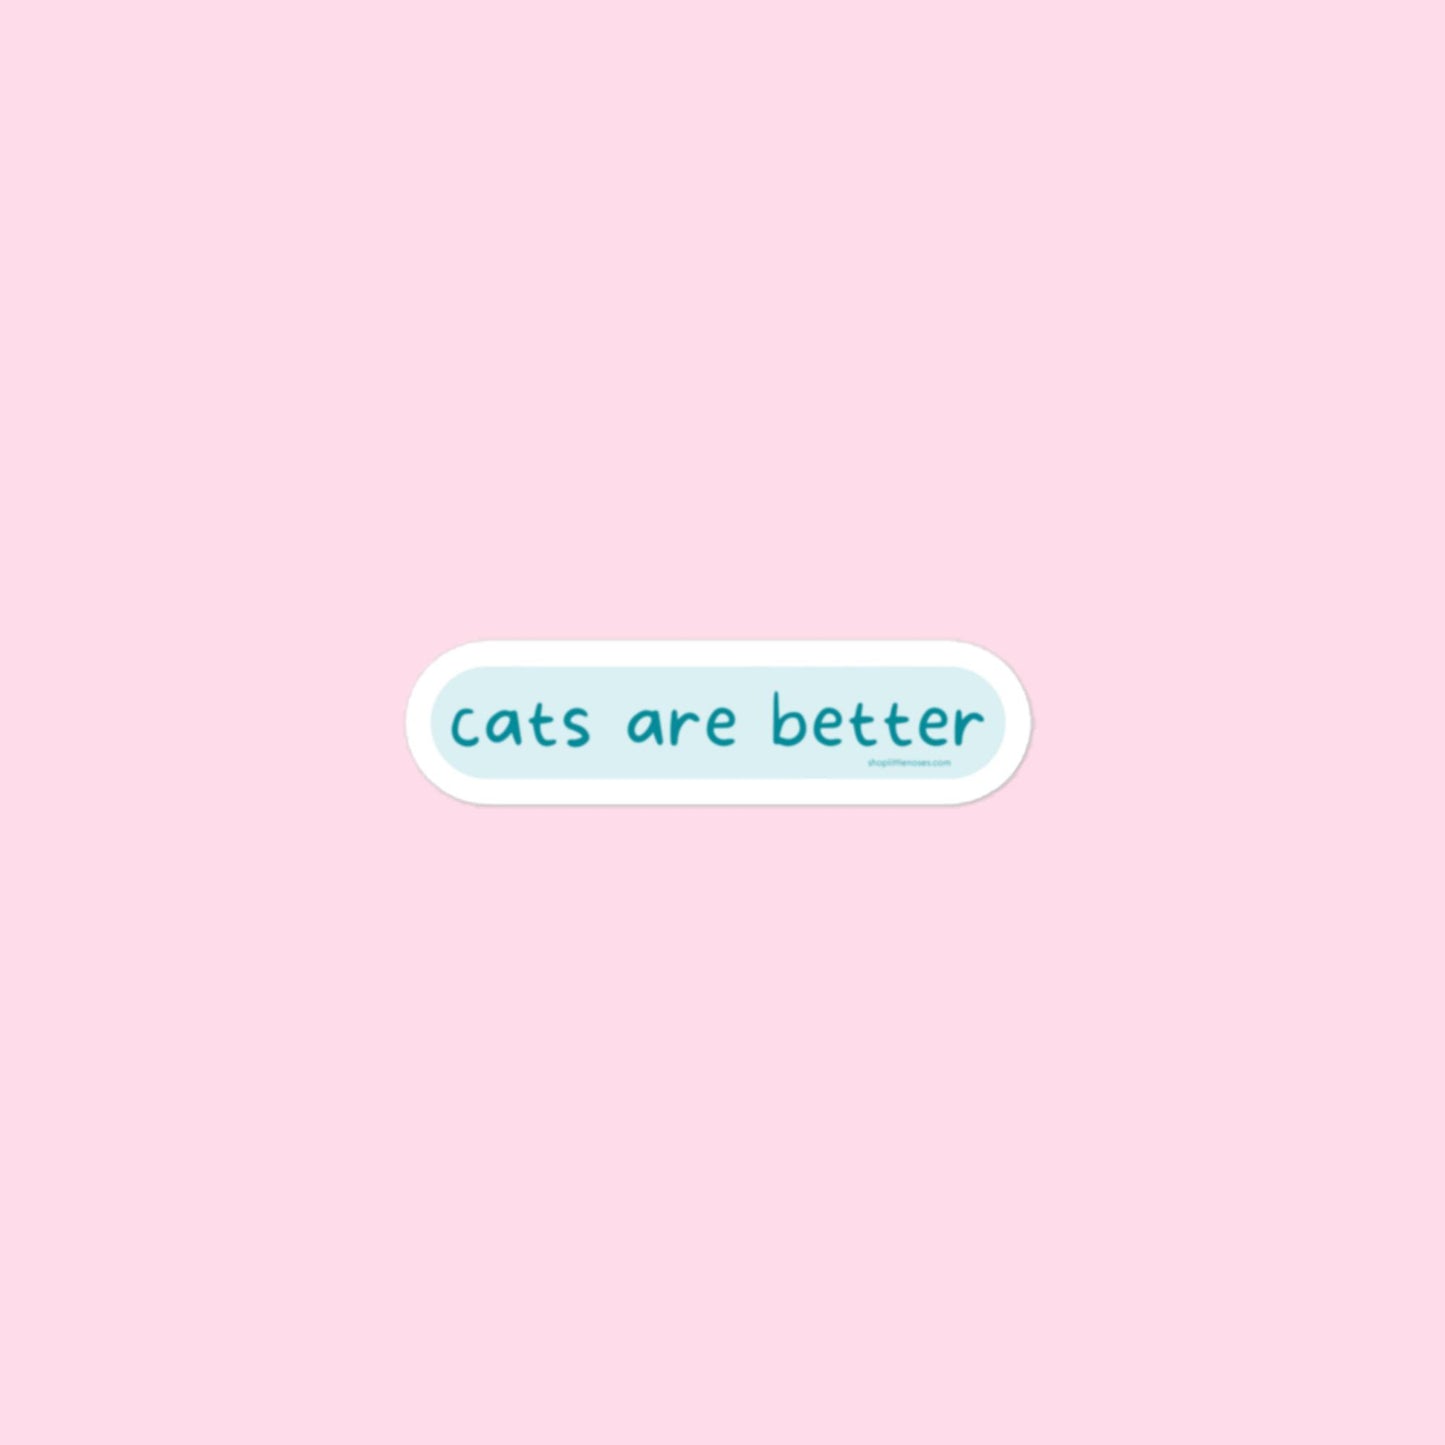 Cats are better sticker